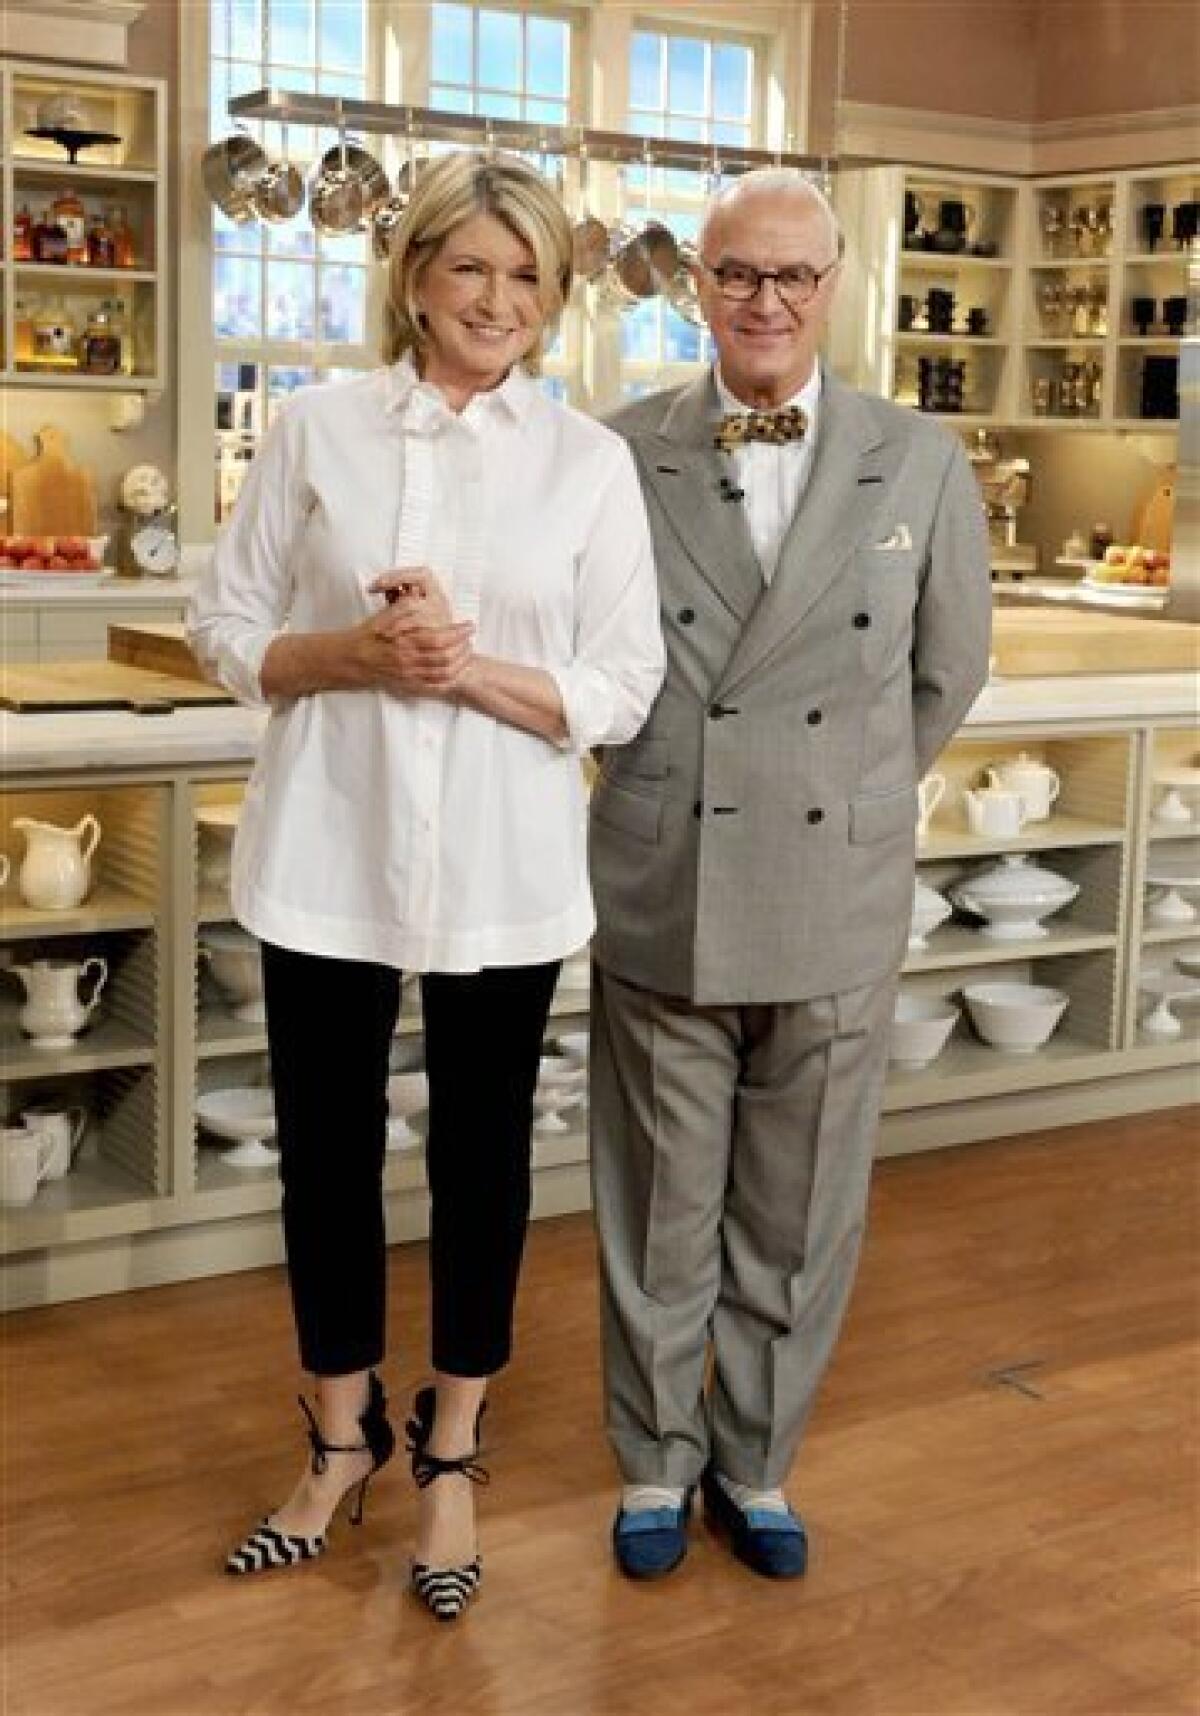 This Oct. 13, 2010 photo released by David E. Steele for The Martha Stewart Show shows Martha Stewart and top footwear designer Manolo Blahnik on the set of "The Martha Stewart Show" in New York. Blahnik, raised in the Canary Islands and now based in London, was in New York Wednesday for an on-air appearance on the show. (AP Photo/The Martha Stewart Show, David E. Steele) MANDATORY CREDIT: DAVID E. STEELE/THE MARTHA STEWART SHOW; NO SALES; NO ARCHIVES